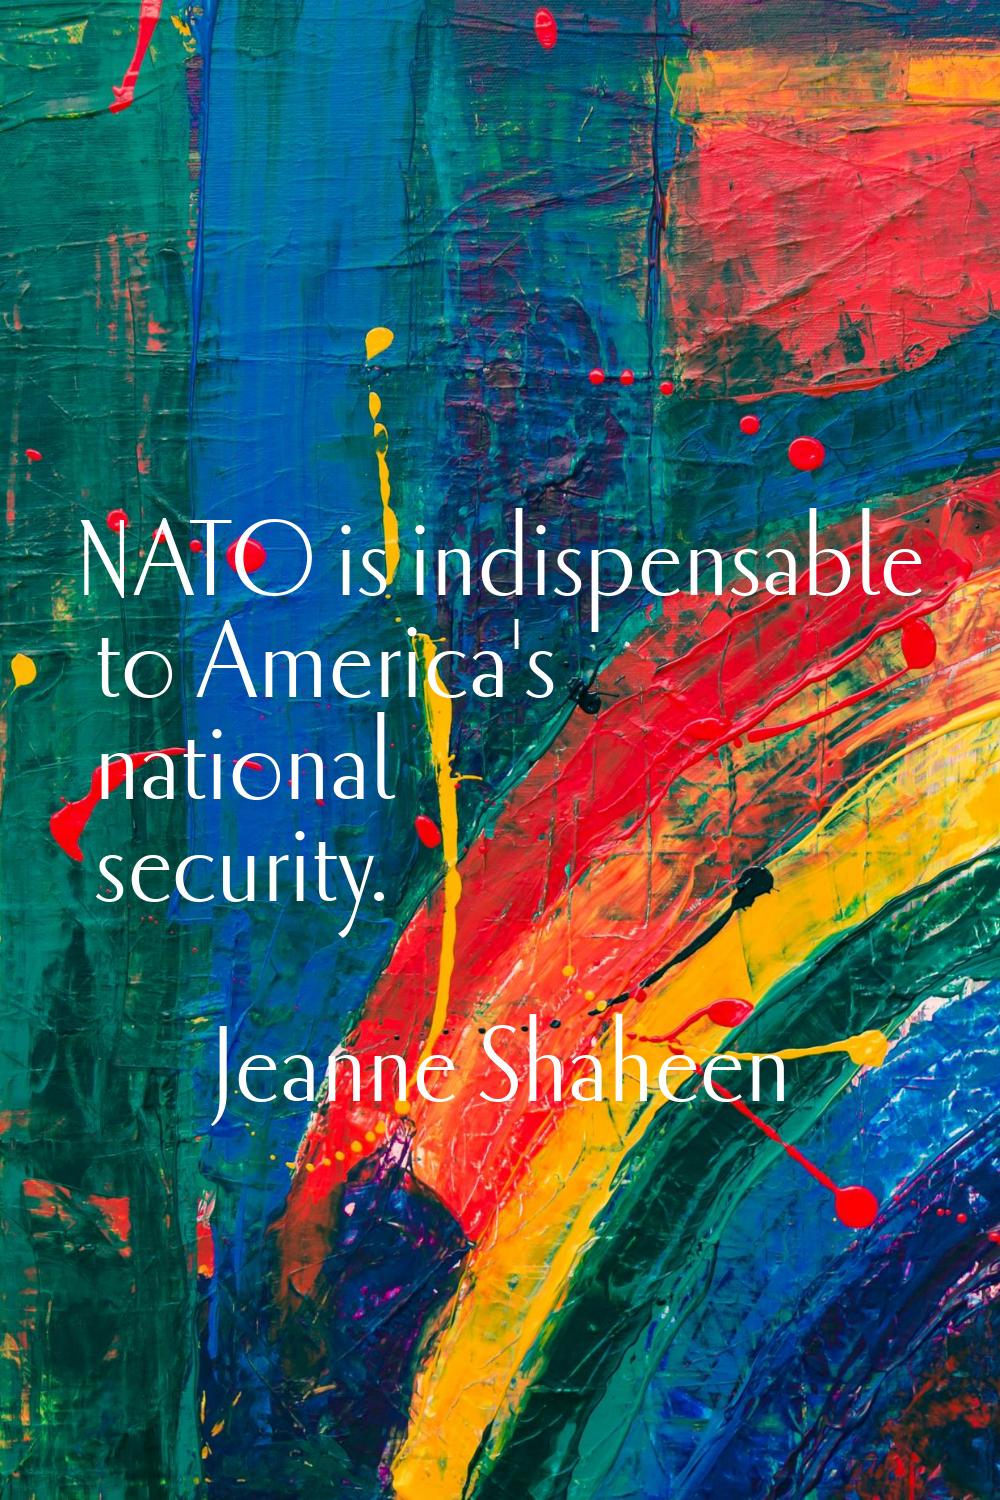 NATO is indispensable to America's national security.